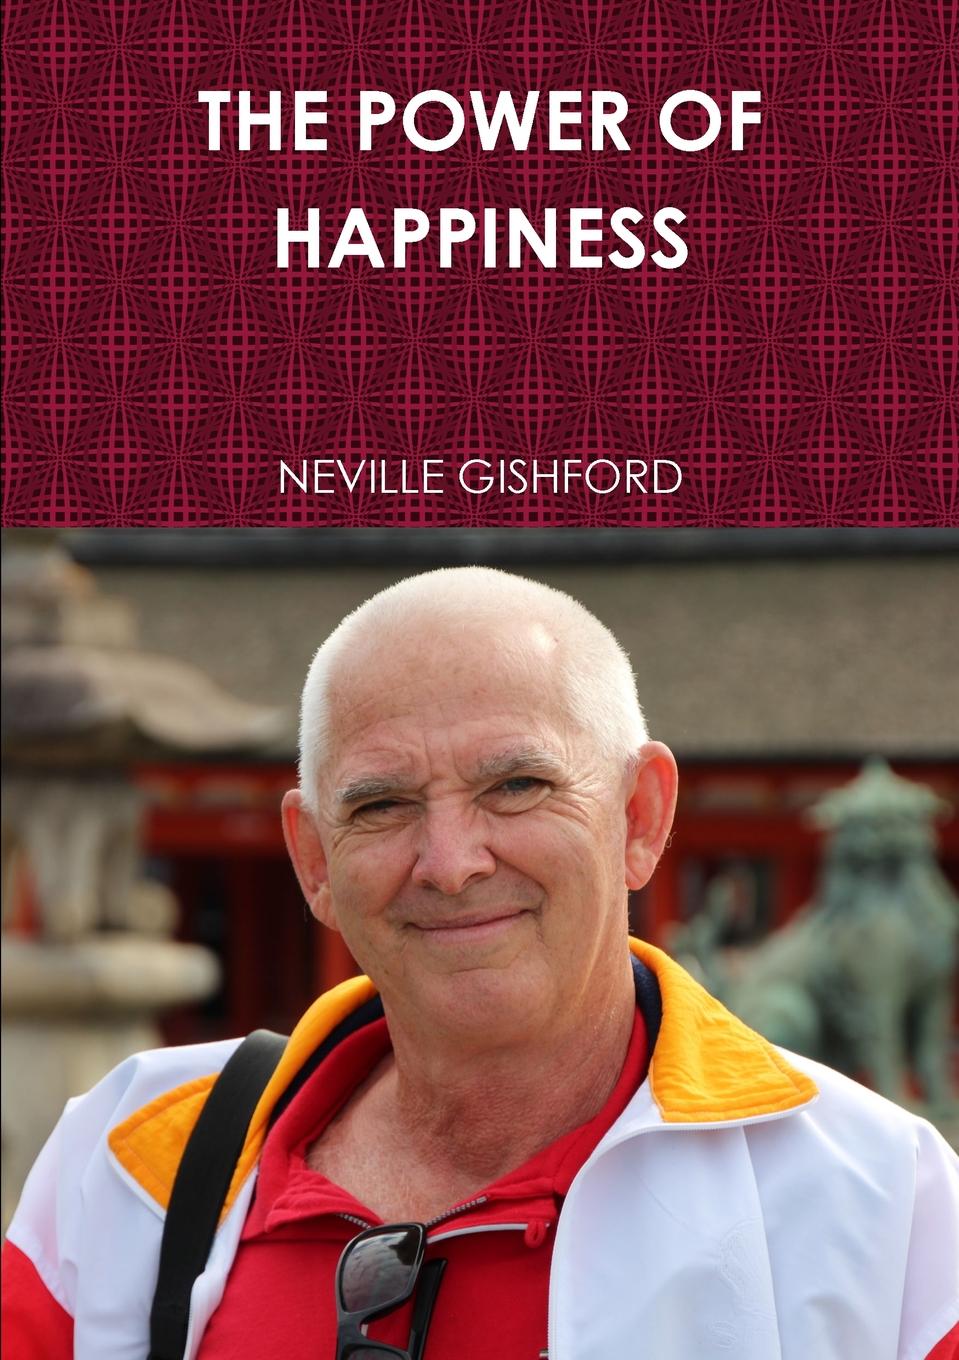 NEVILLE GISHFORD THE POWER OF HAPPINESS